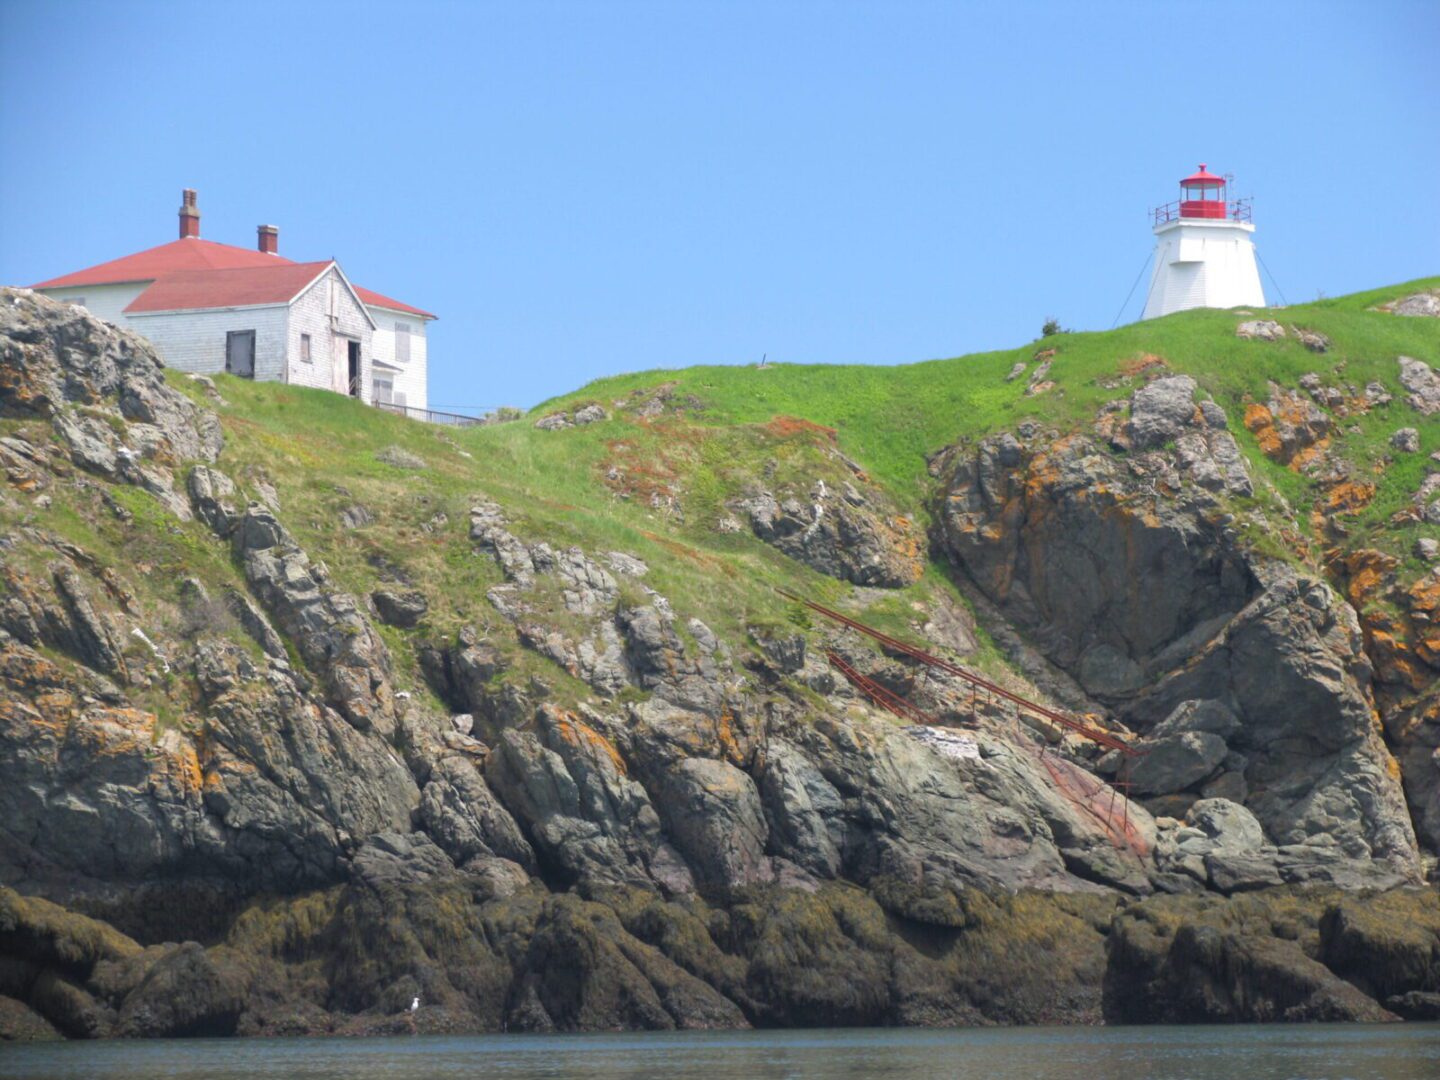 A lighthouse sits on top of a rocky hill.